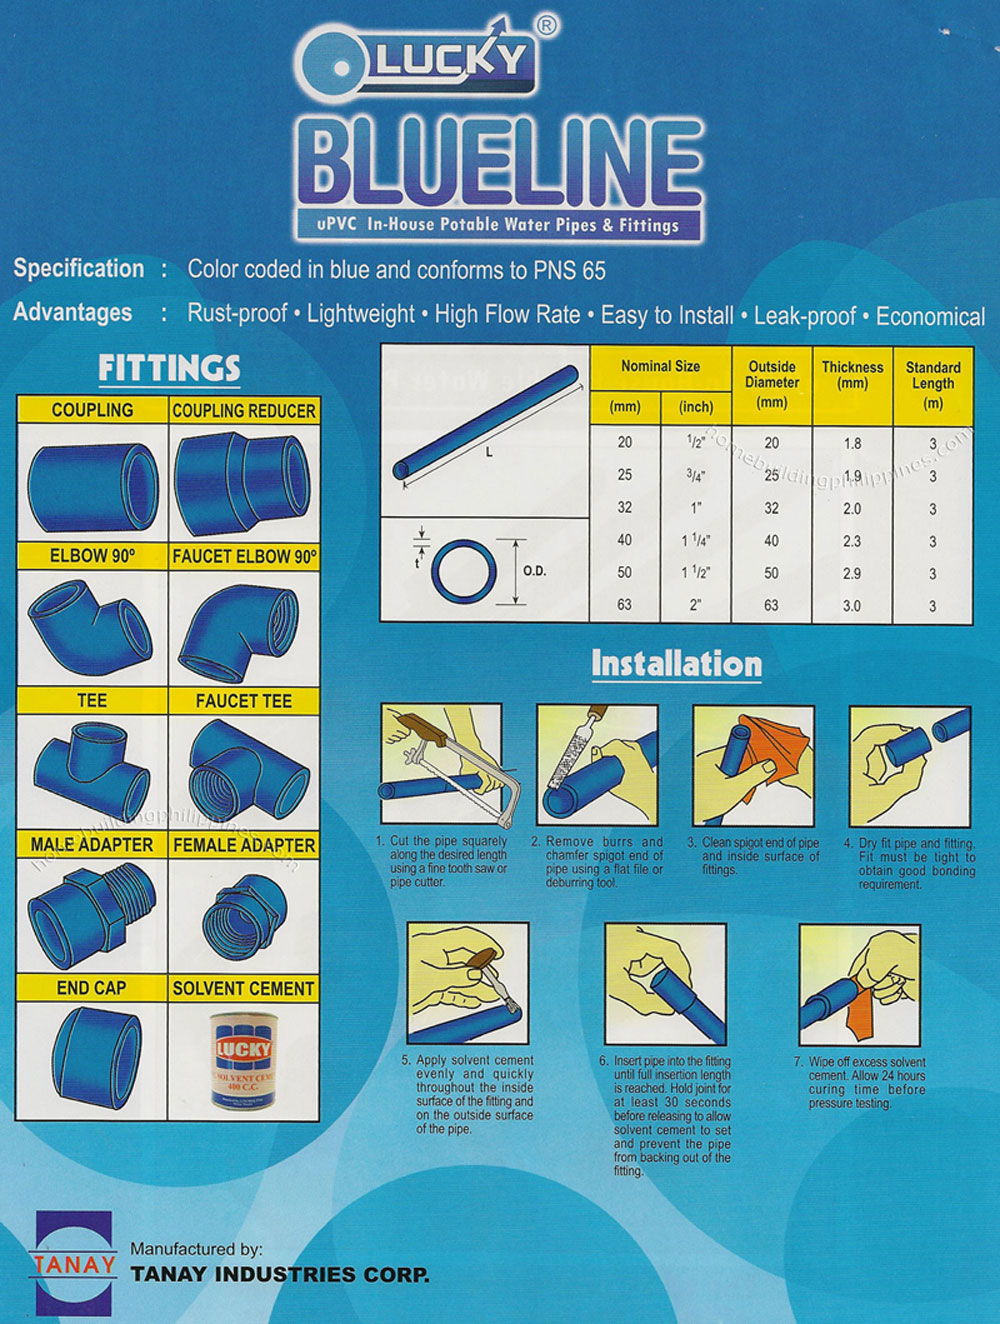 Blueline uPVC In-House Potable Water Pipes and Fittings